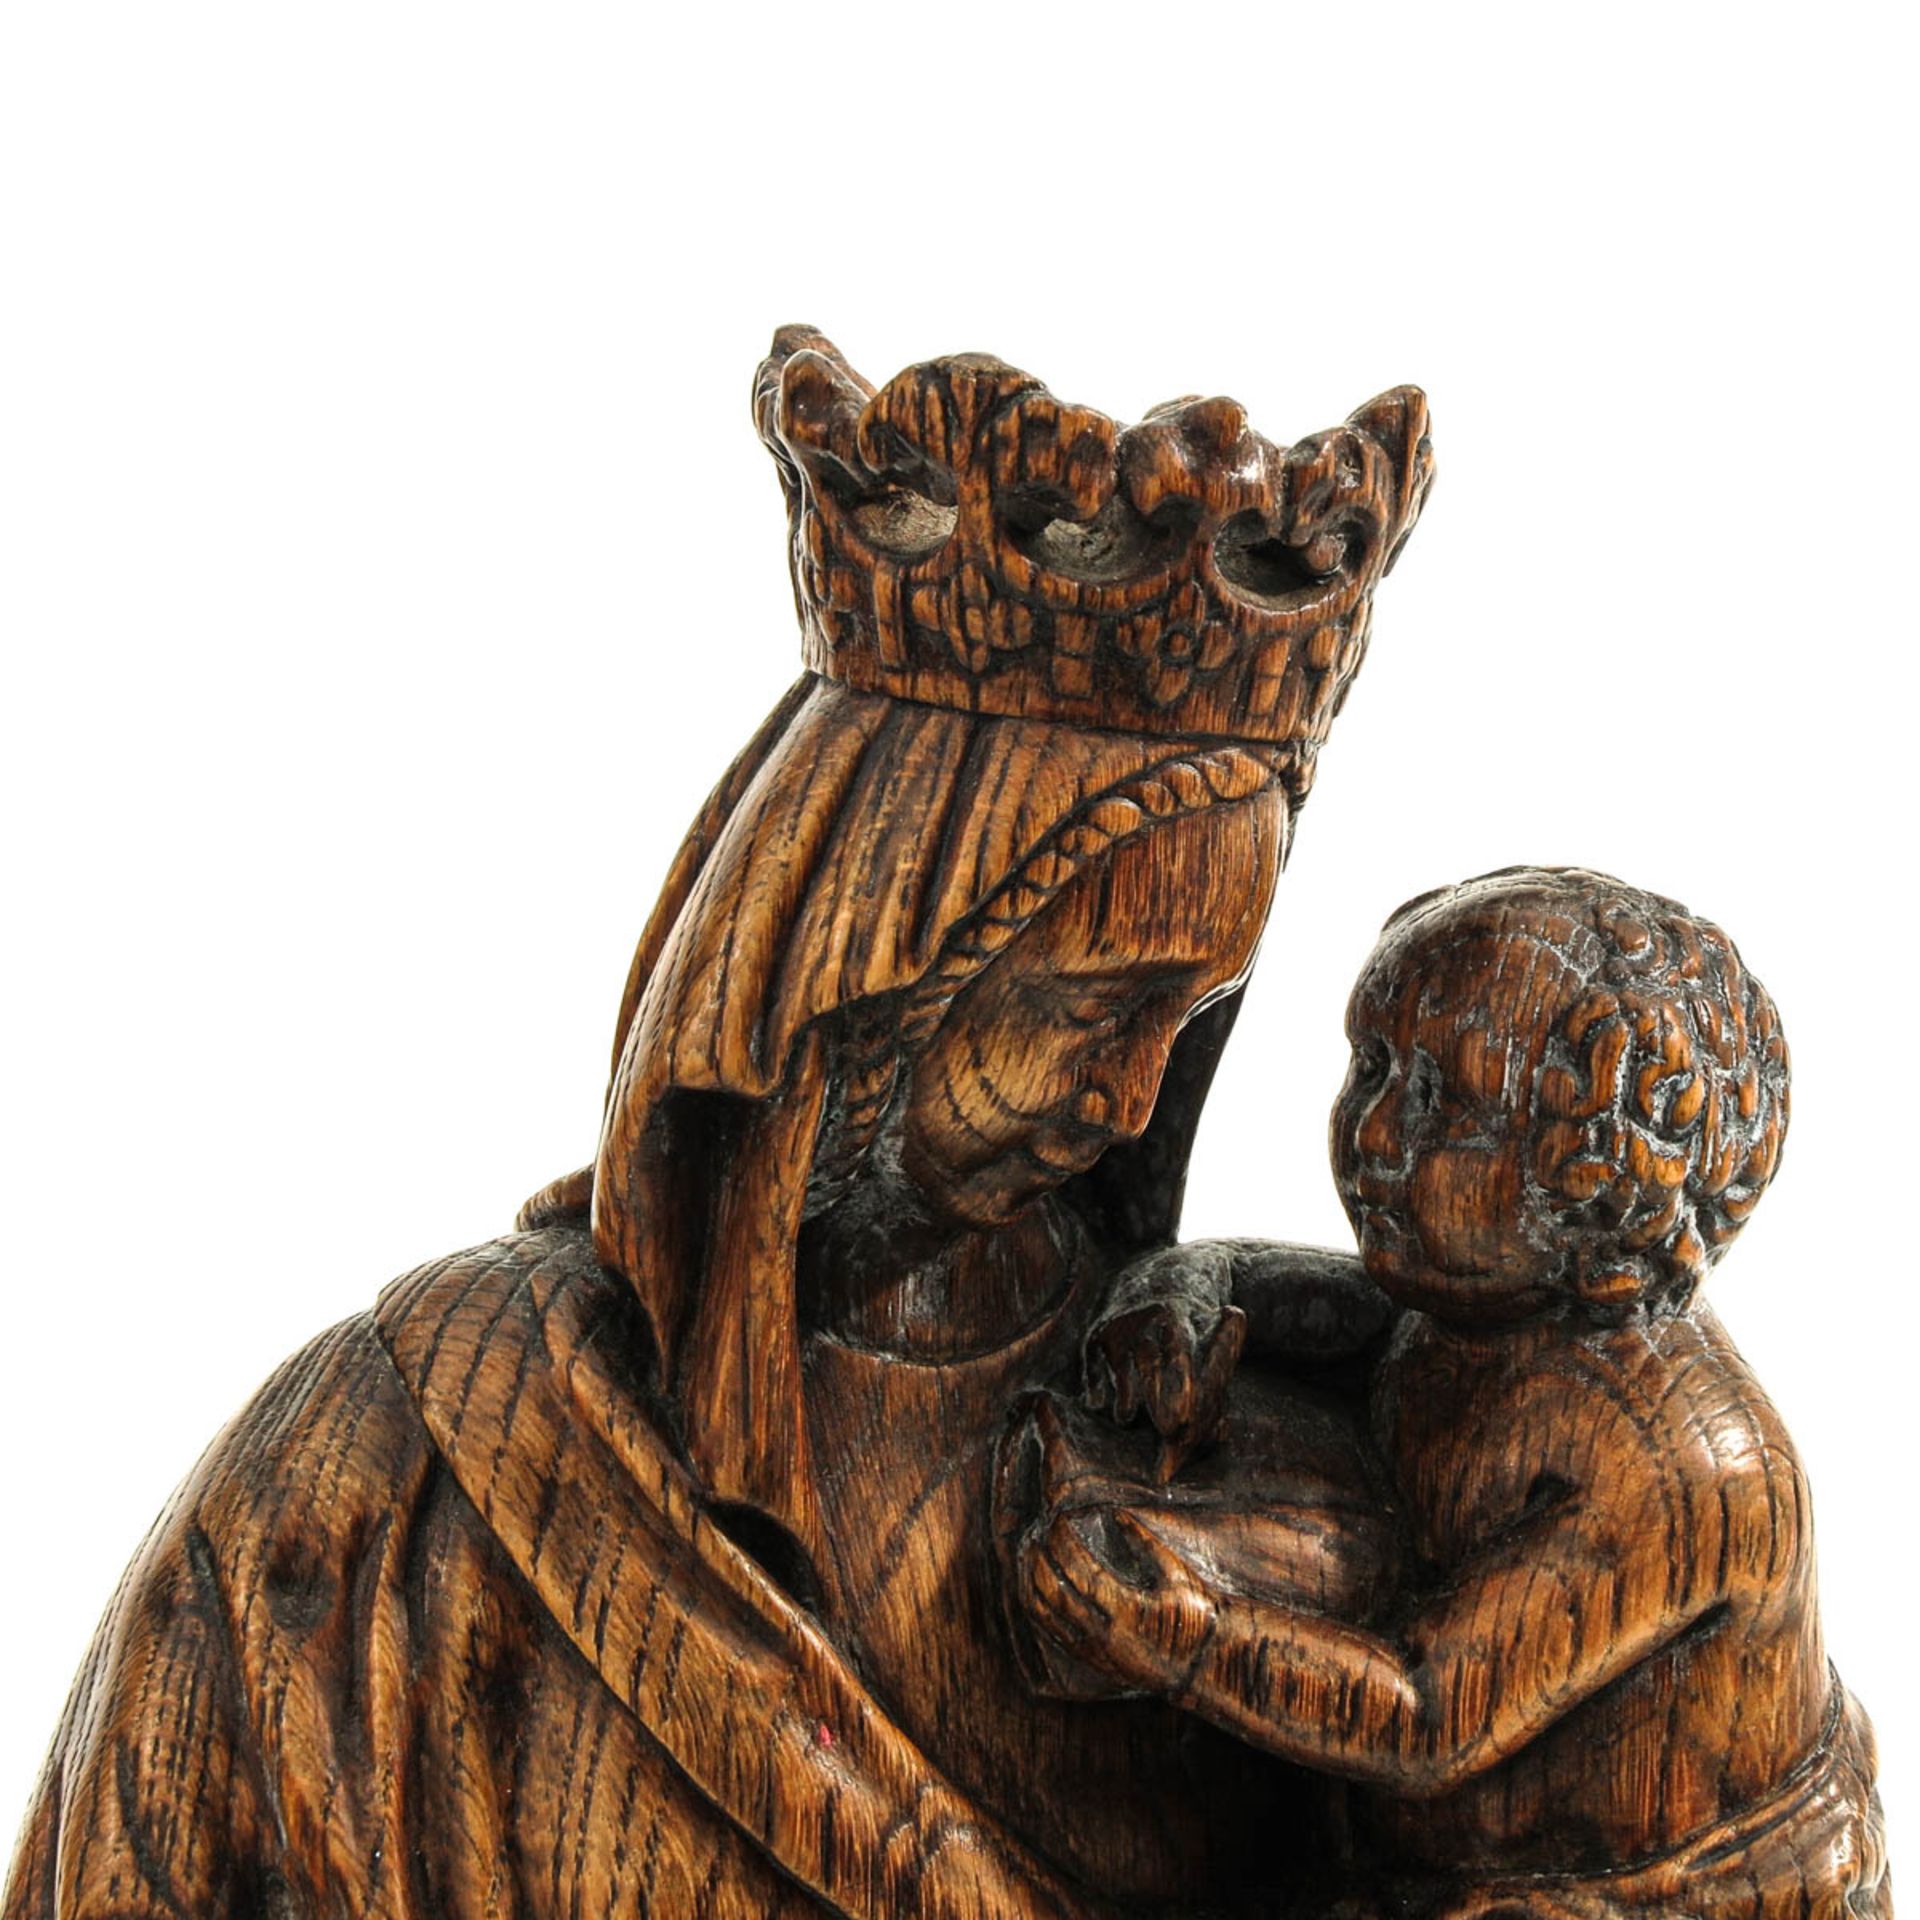 A Wood Sculpture of Madonna with Child - Image 6 of 8